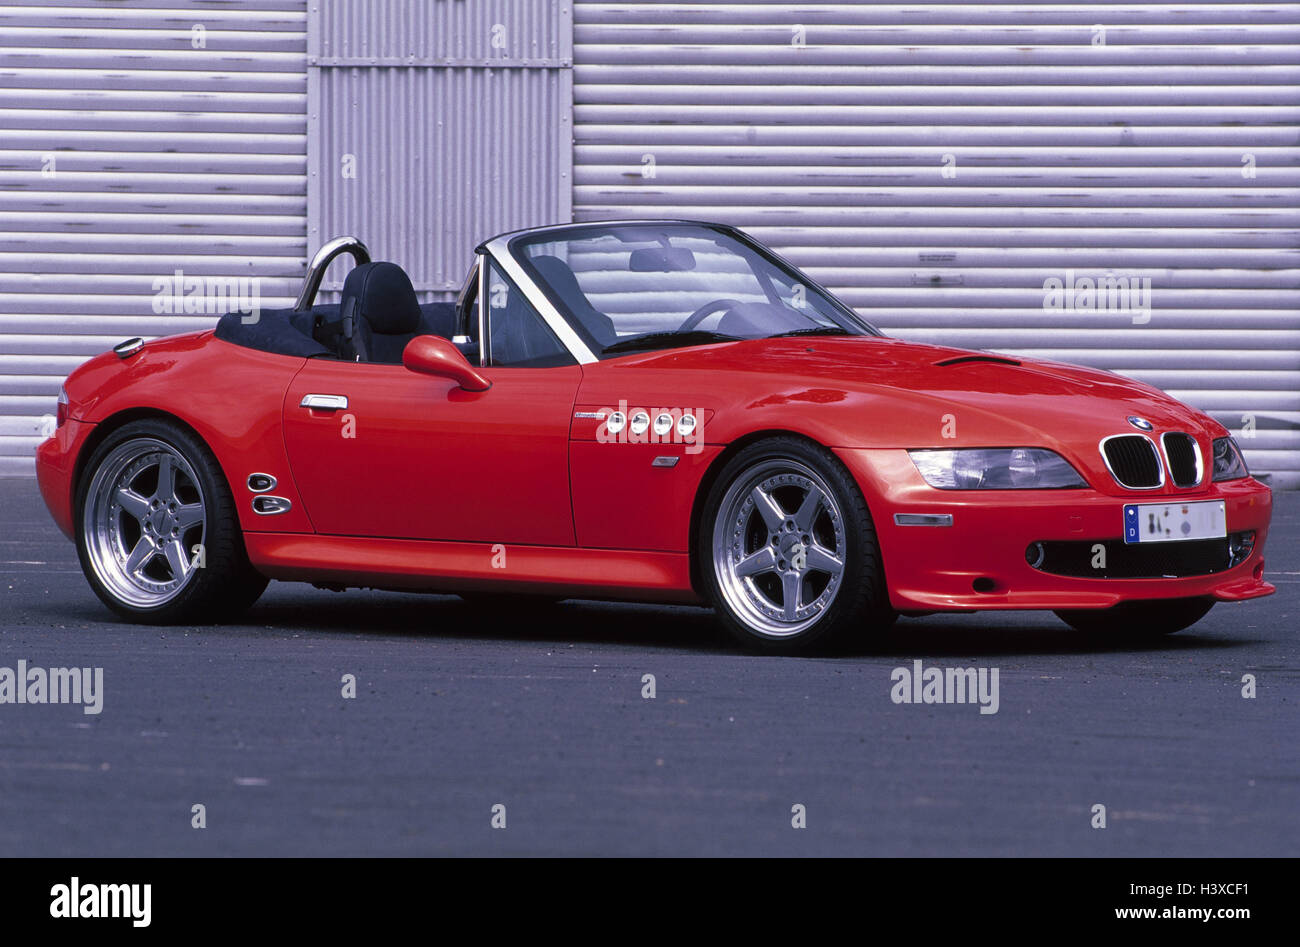 BMW m, roadster, red traffic, car, car, passenger car, means transportation, vehicle, autotype, BMW, convertible, cabriolet, carriage, new carriage, expensive, exclusiv, quickness, HP Stock Photo